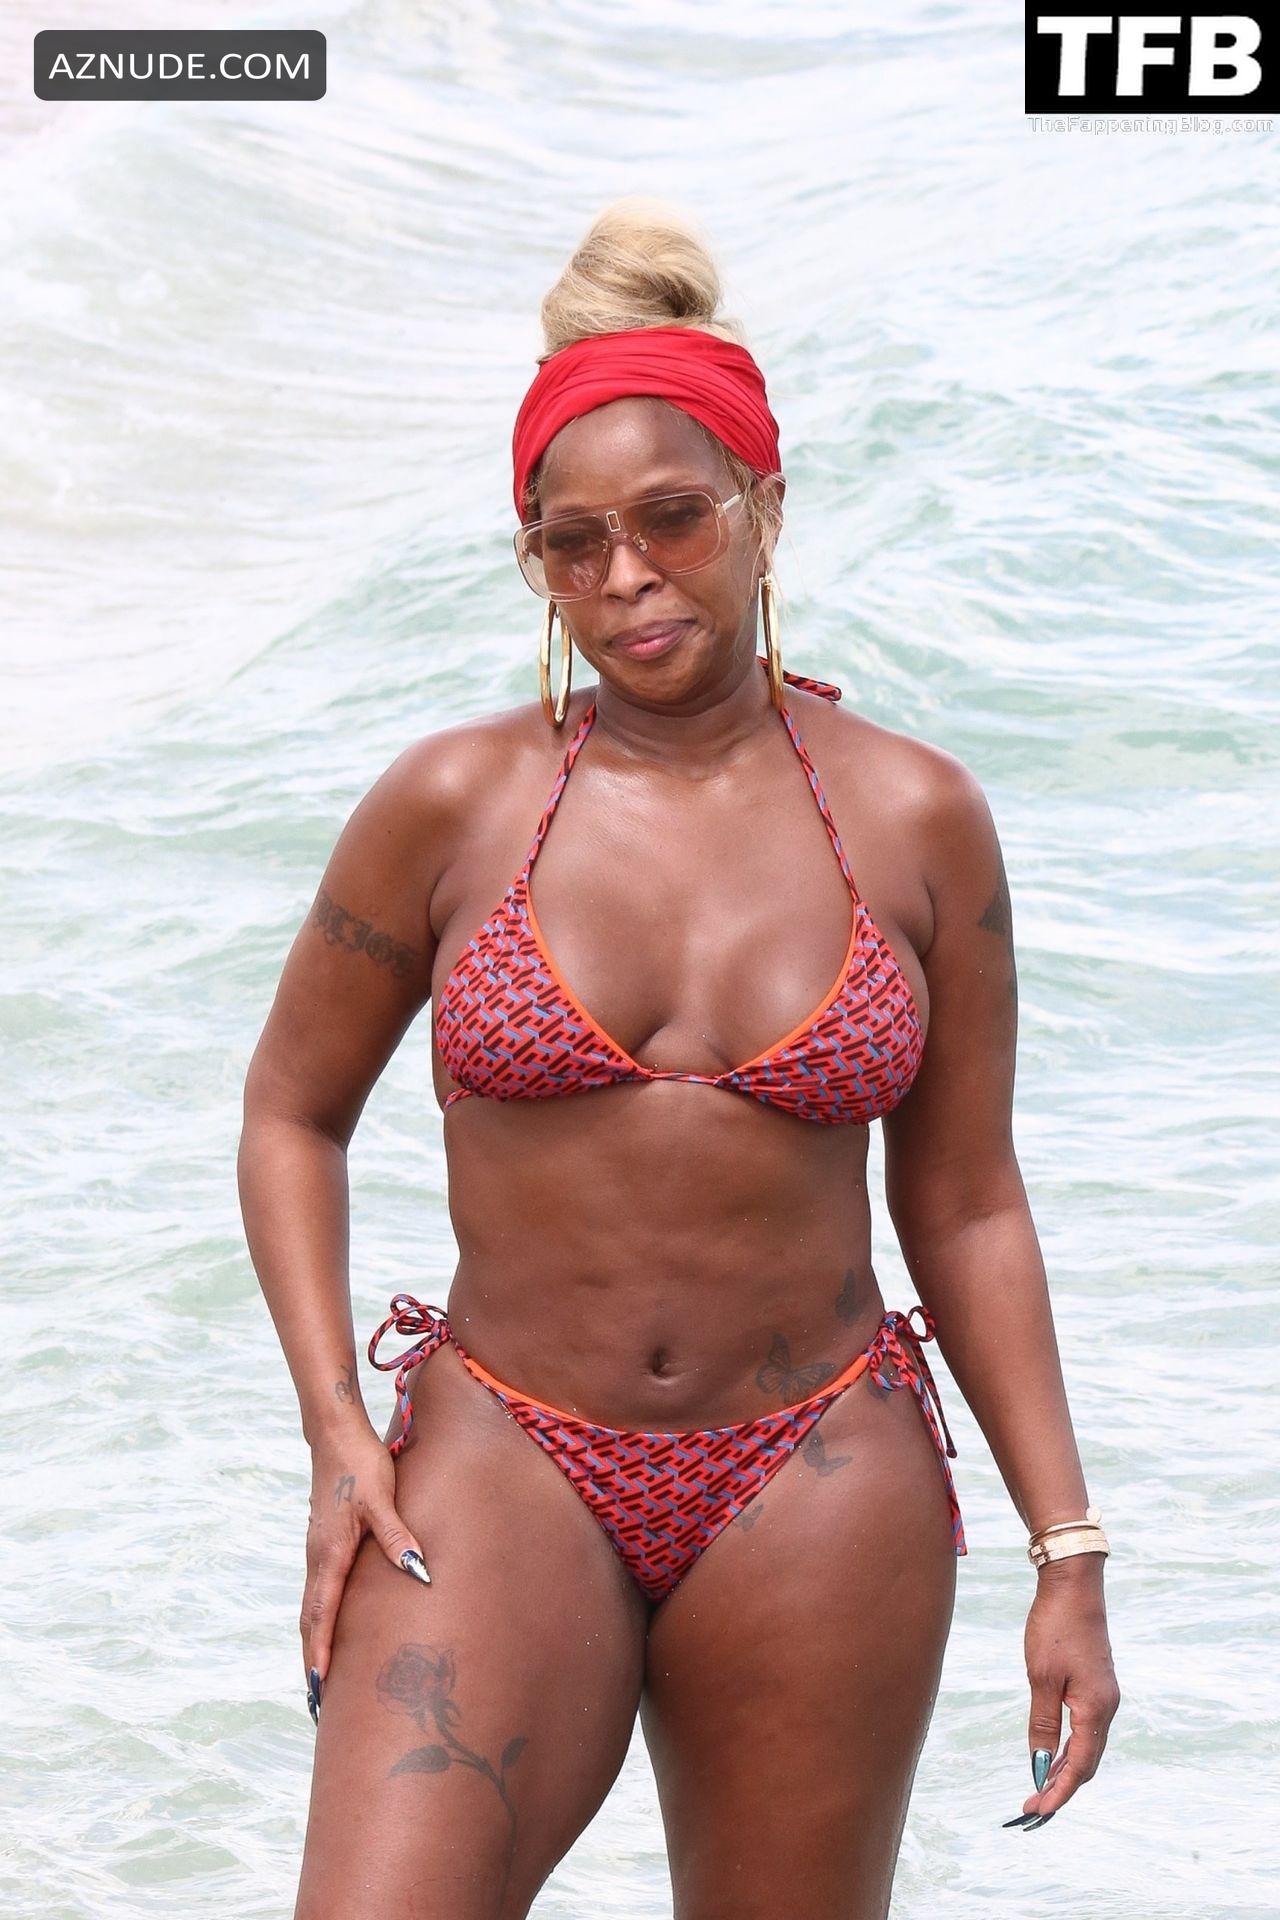 Mary J Blige Sexy Seen Showing Off Her Curves In A Bikini At The Beach In Miami Aznude